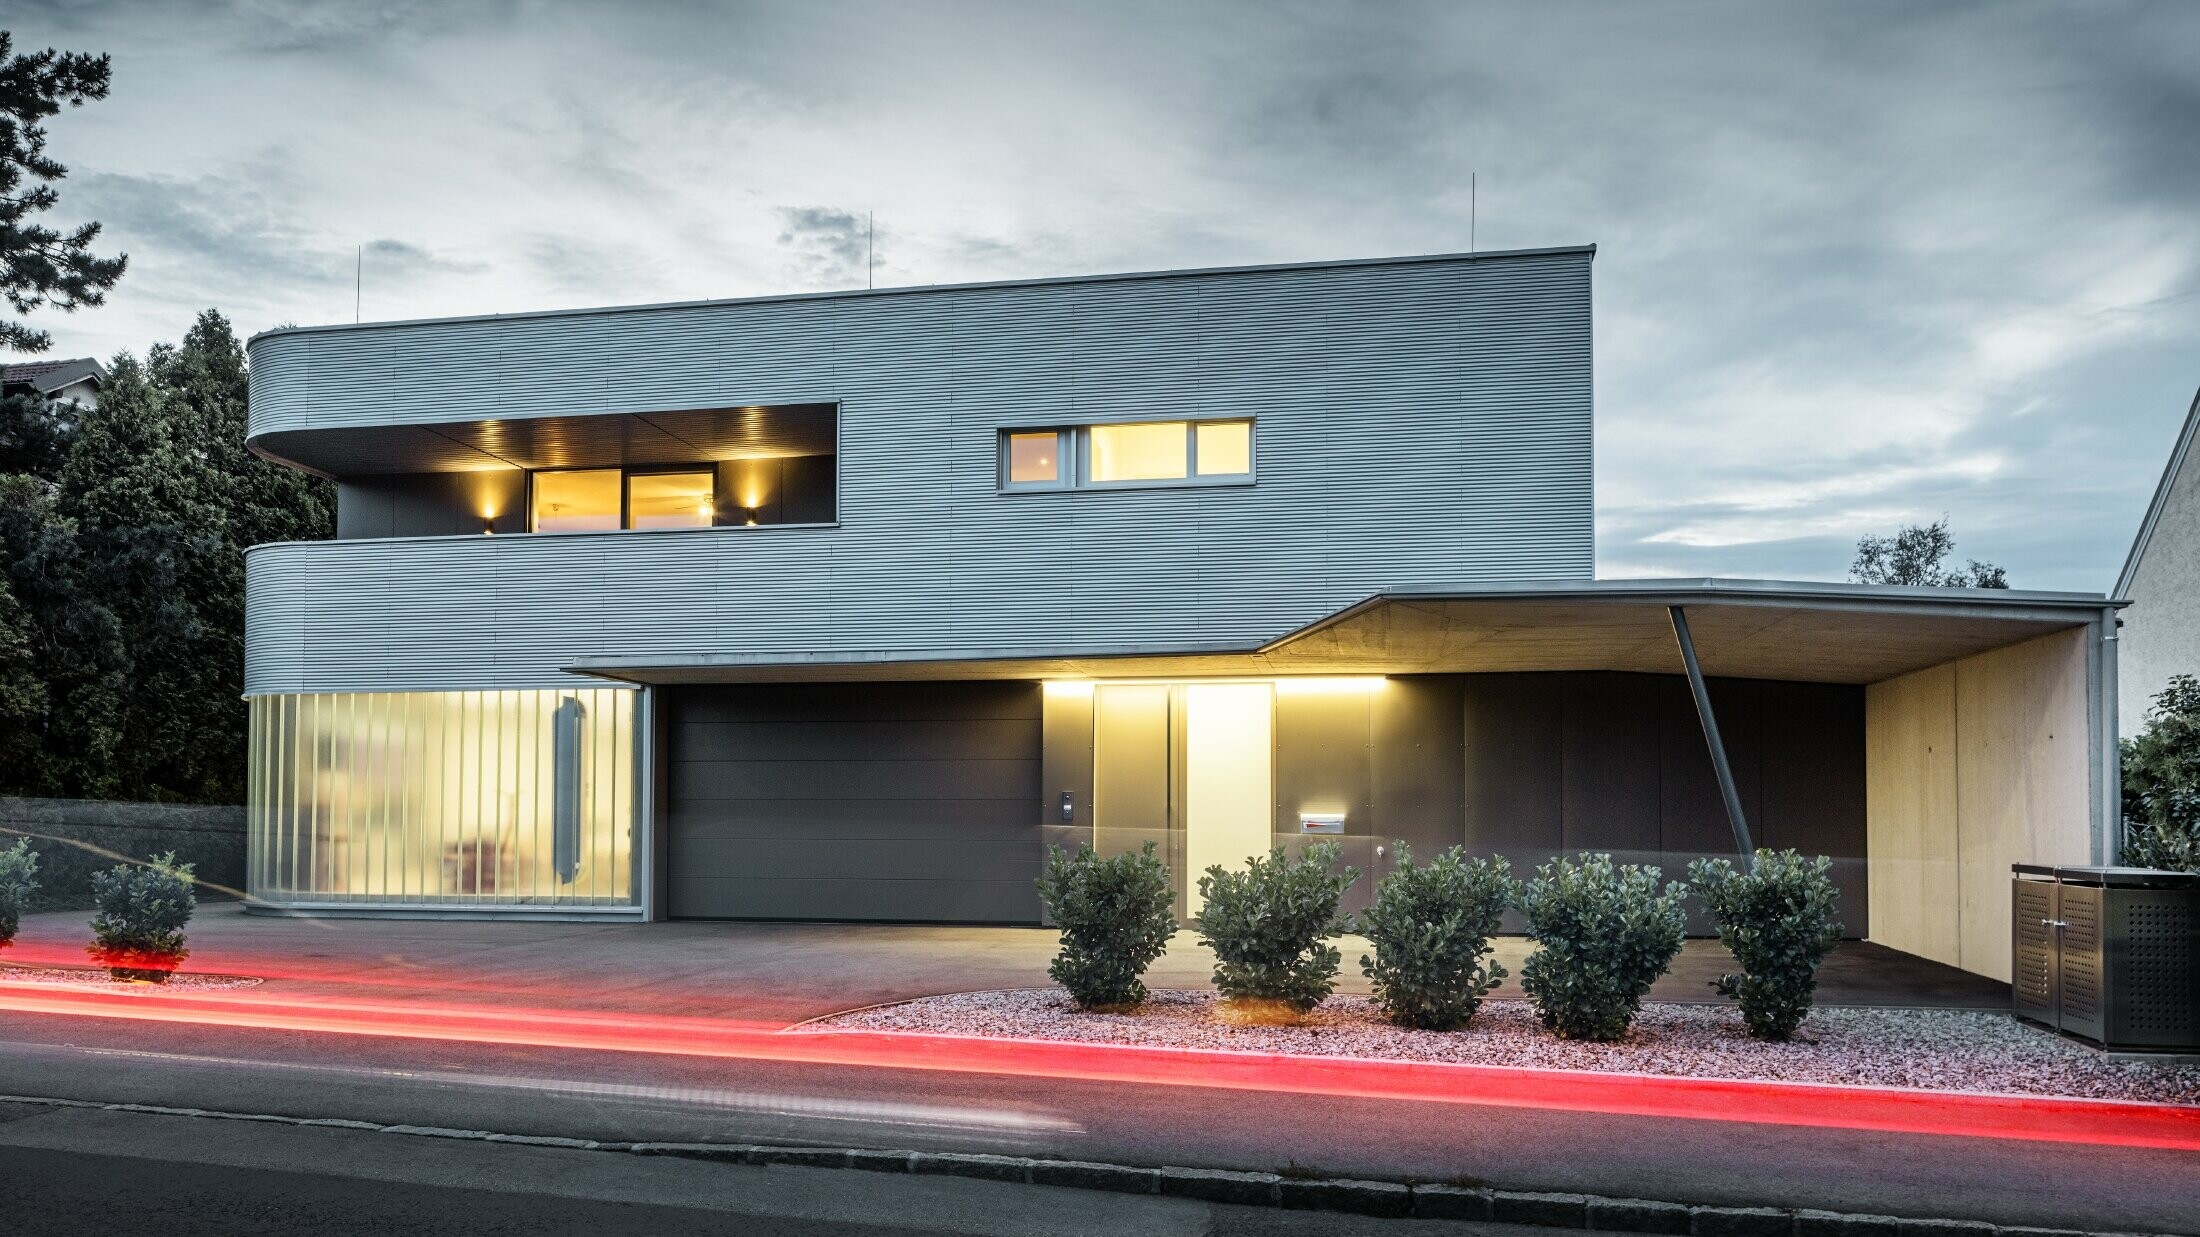 Modern residential building with plain aluminium façade made of the PREFA ripple profile with garage, photographed in evening light